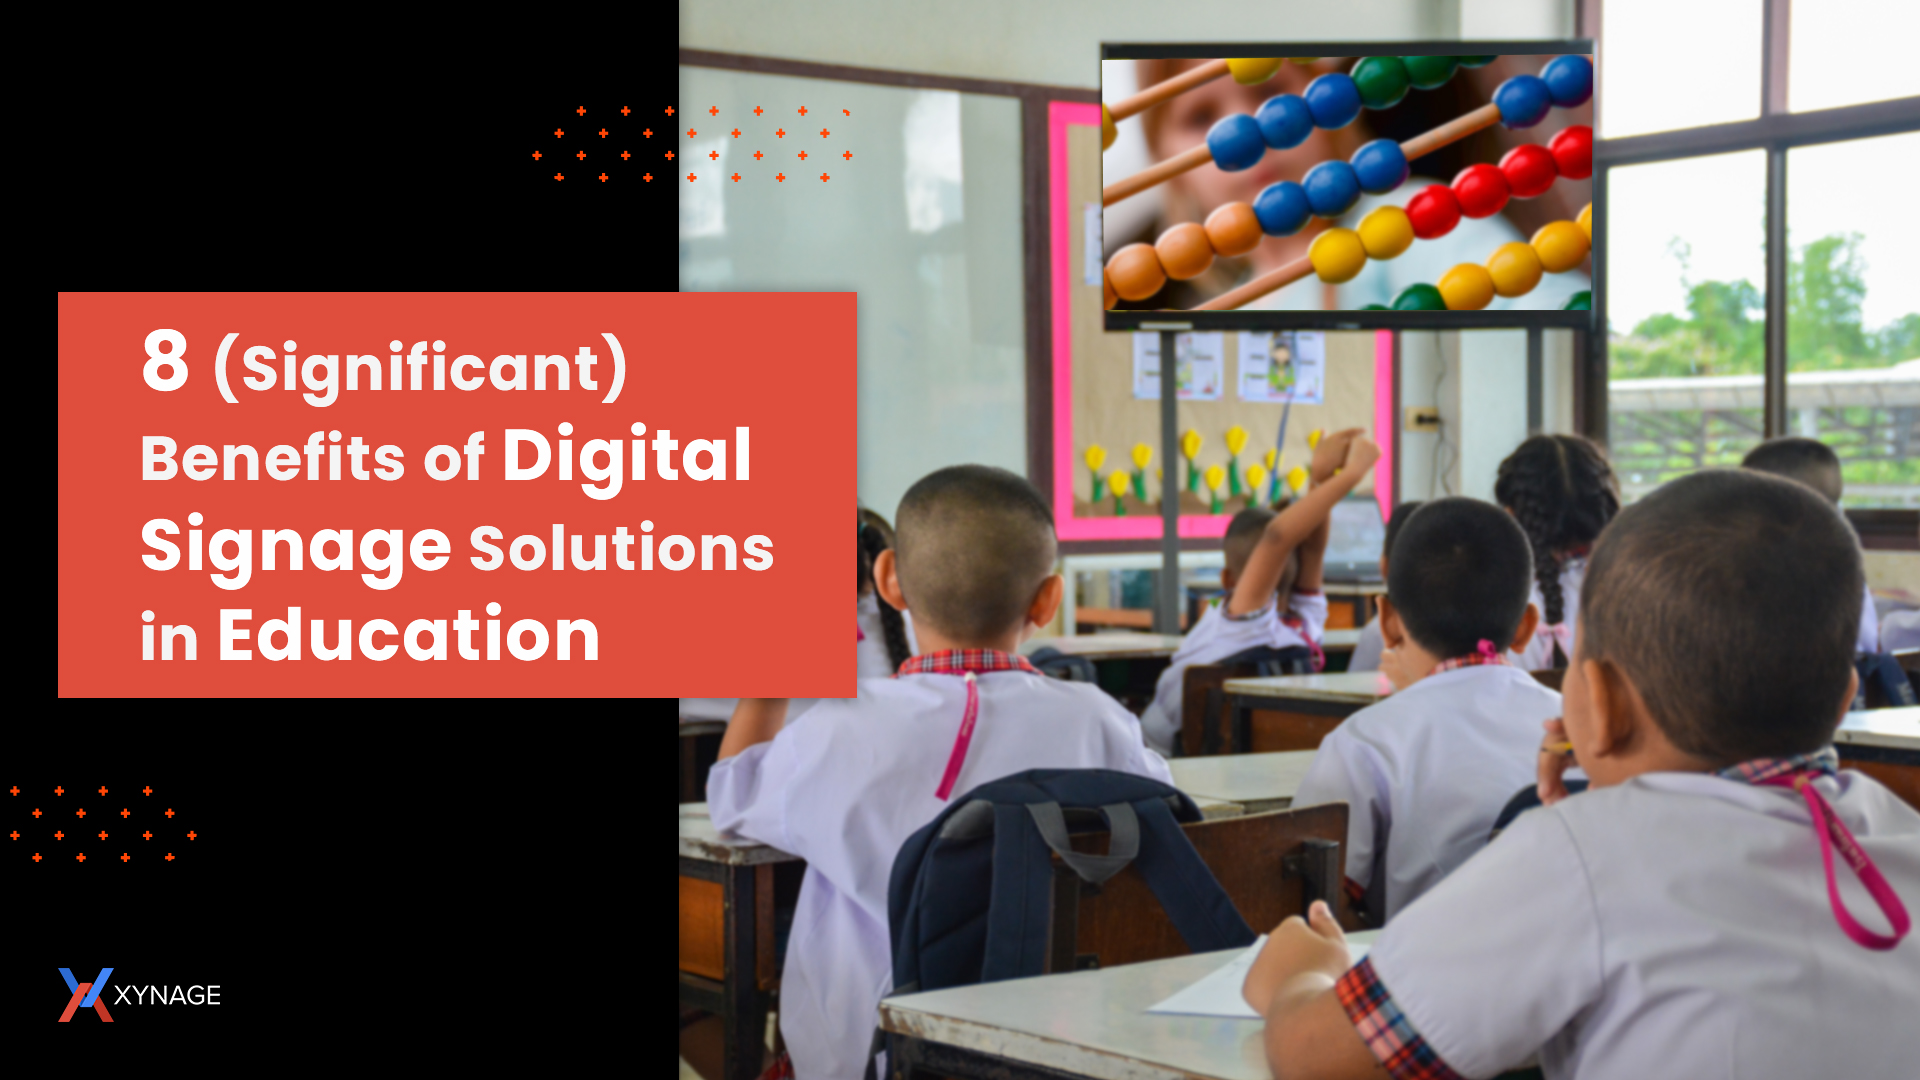 8 (Significant) Benefits of Digital Signage Solutions in Education